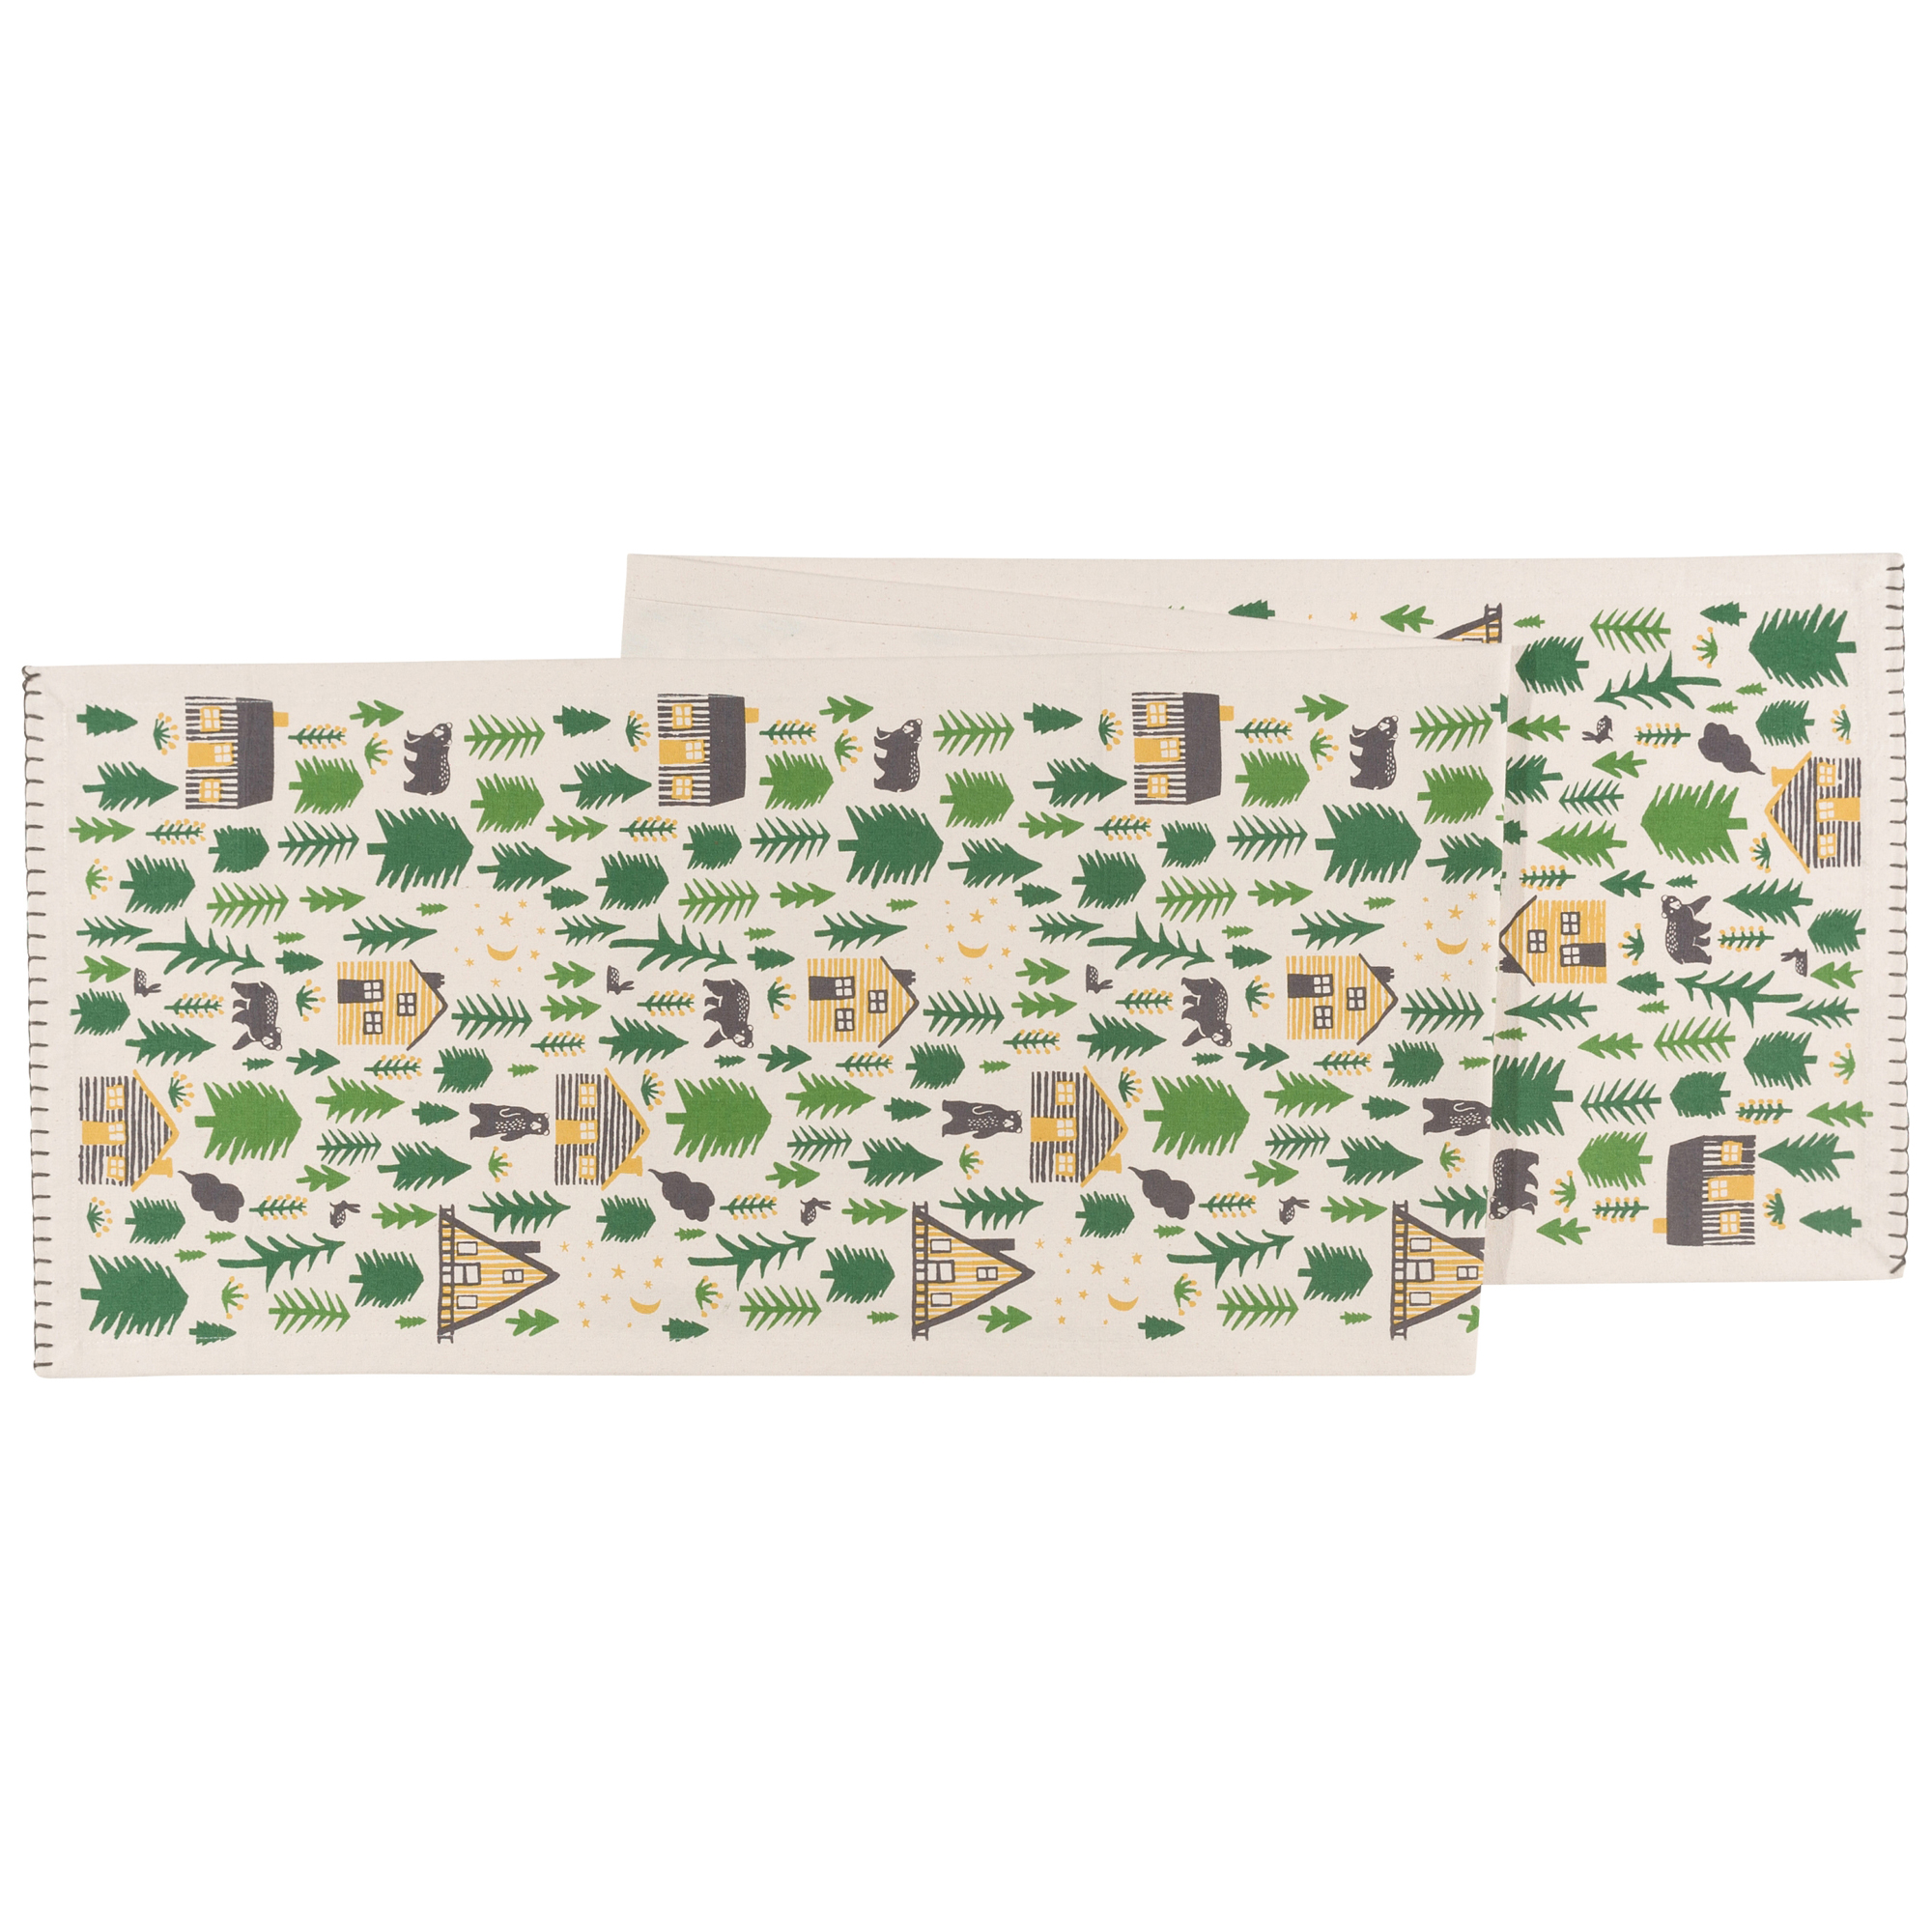 UPC 064180245675 product image for Now Designs Wild & Free Table Runner, Multi | upcitemdb.com